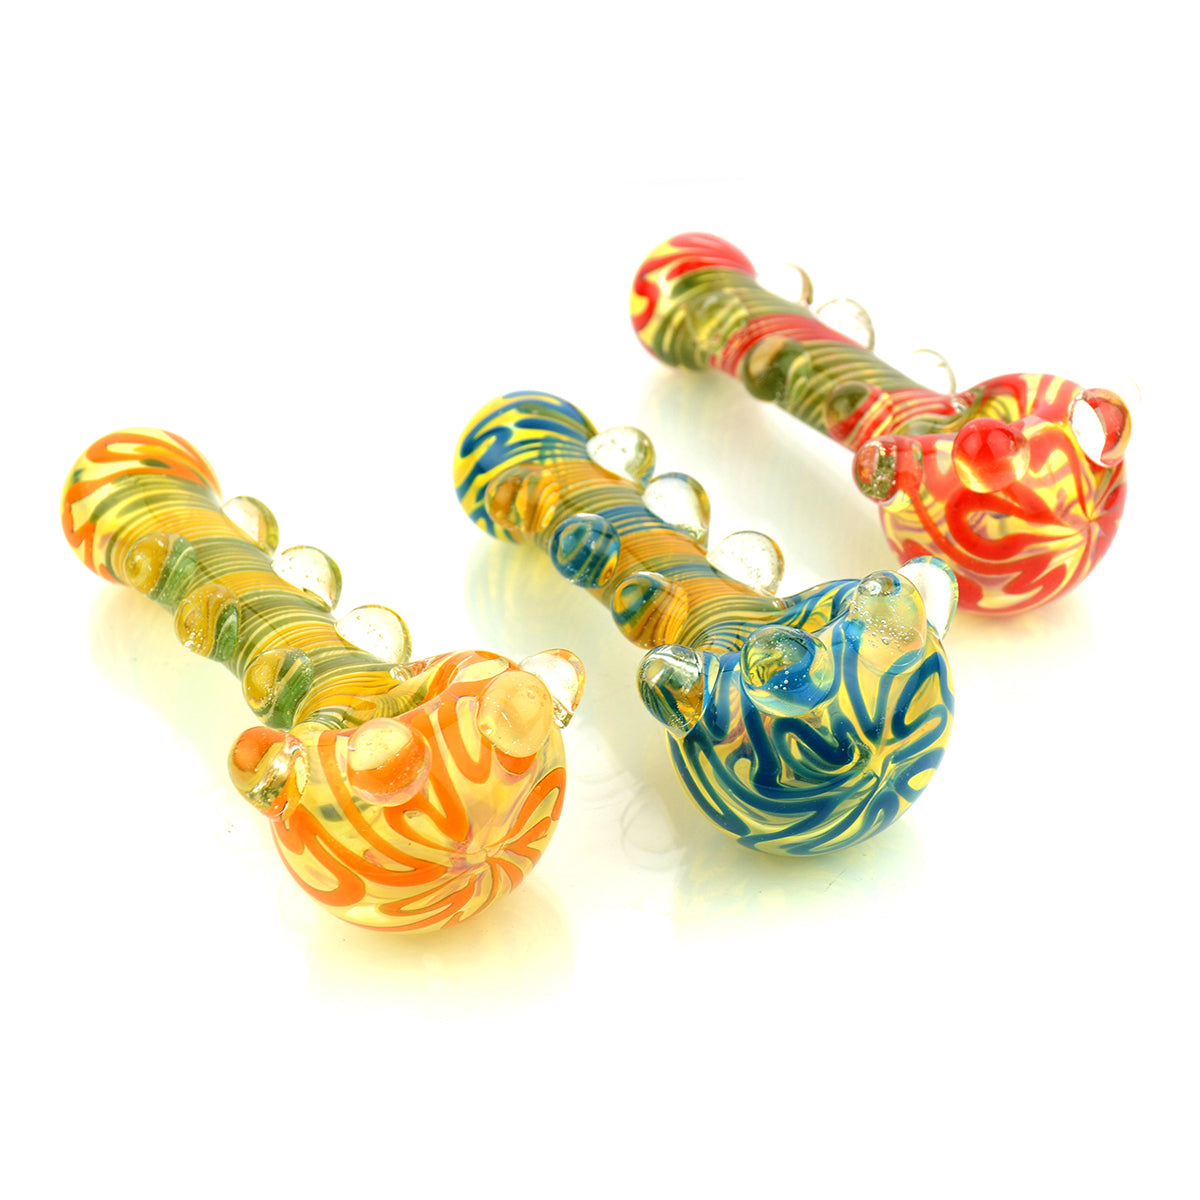 5" Hand Pipe Swirling Art Design with Knockers - LA Wholesale Kings